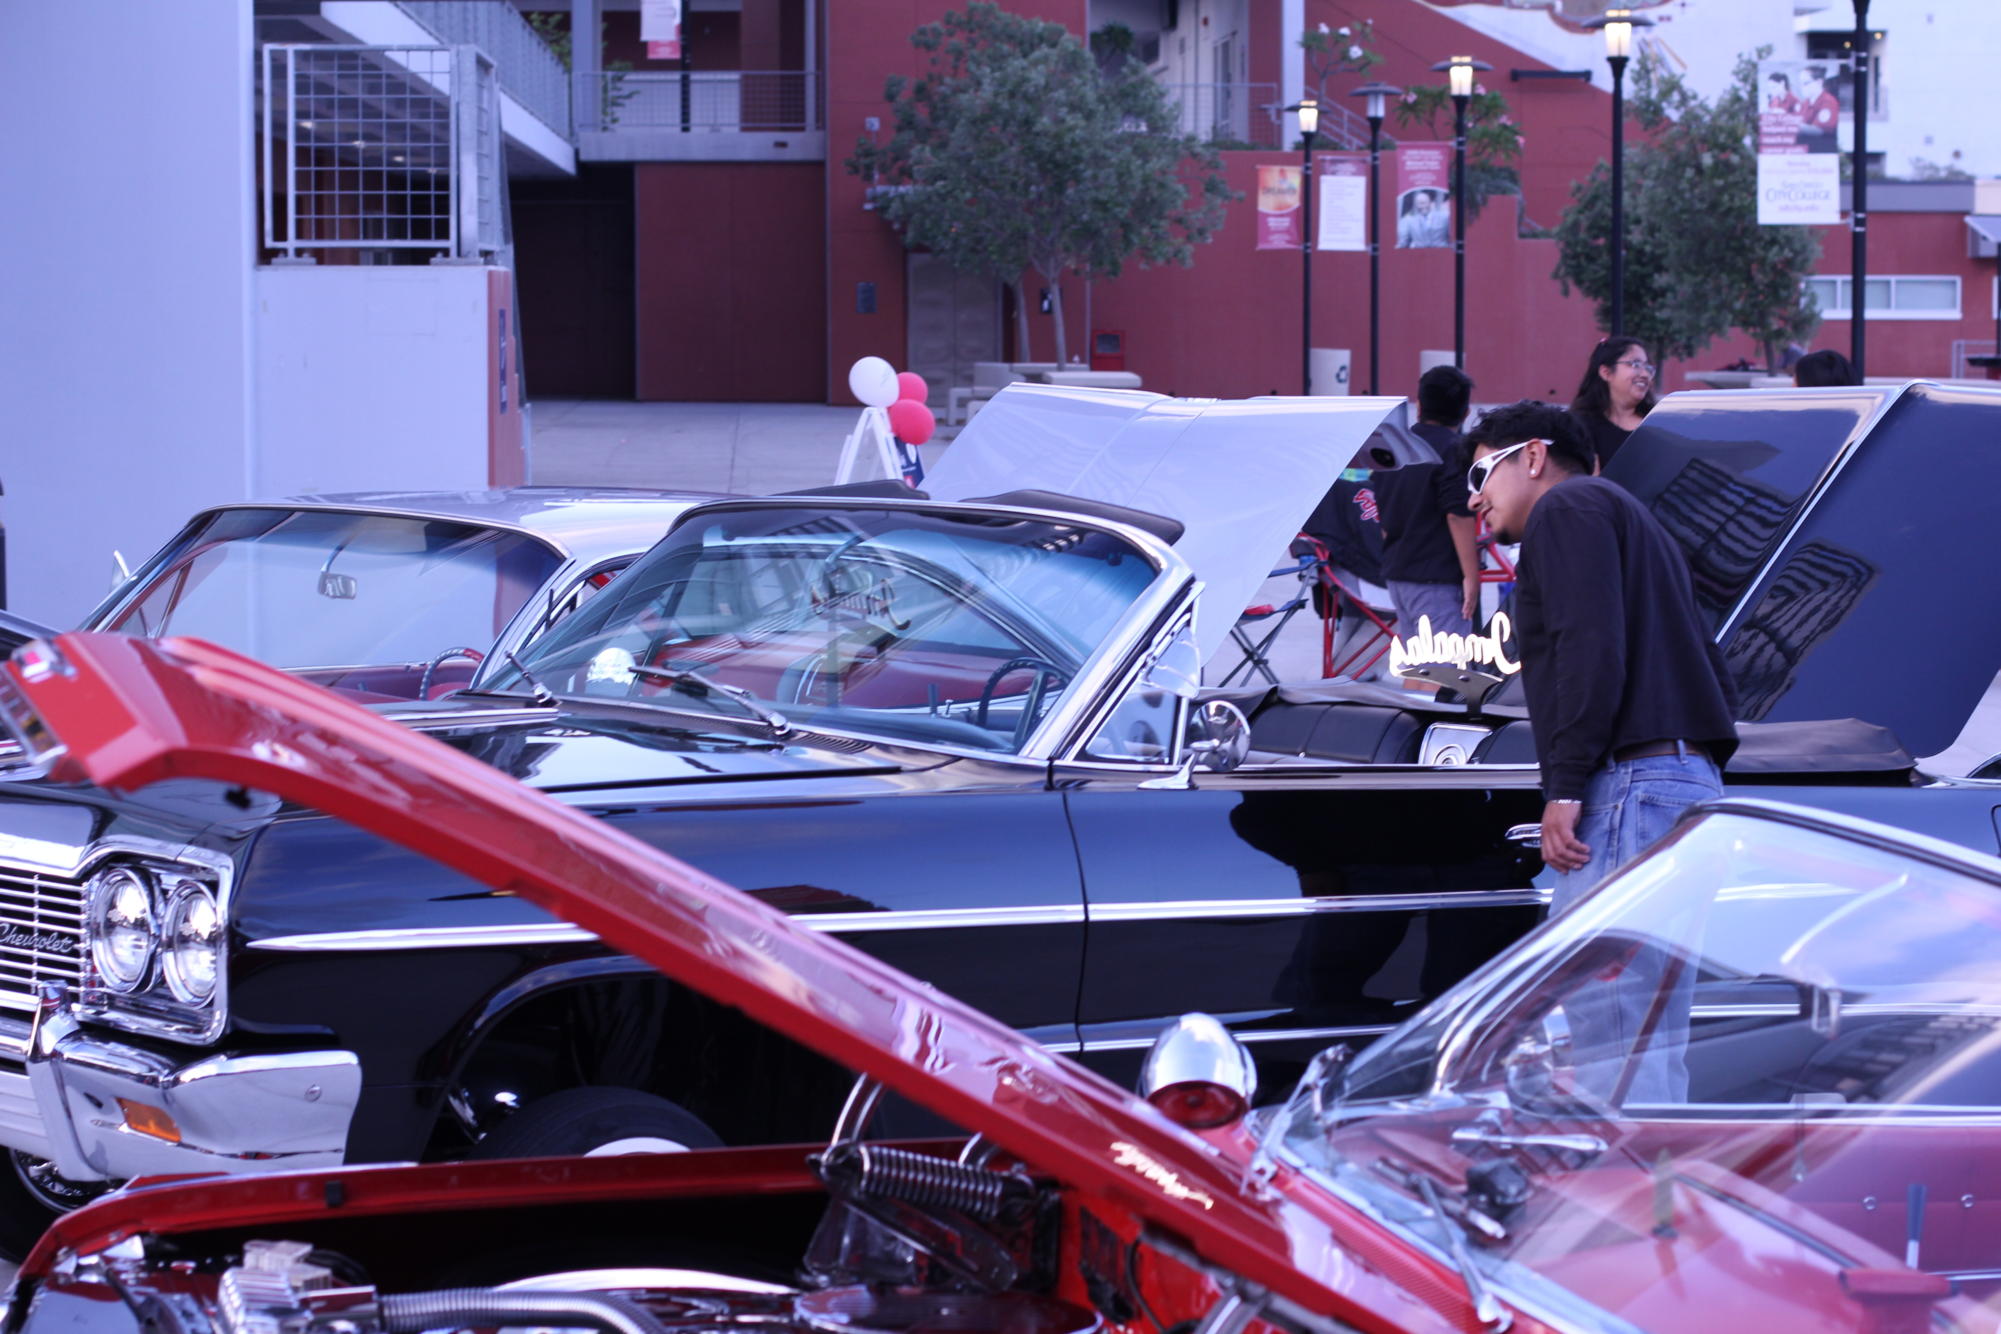 Gary Rodas, a former City College student, admires one of the Impala Car Club lowriders while attending the Noche de Familia event in support of his girlfriend, September 20, 2023. Photo by Keila Menjivar/City Times Media